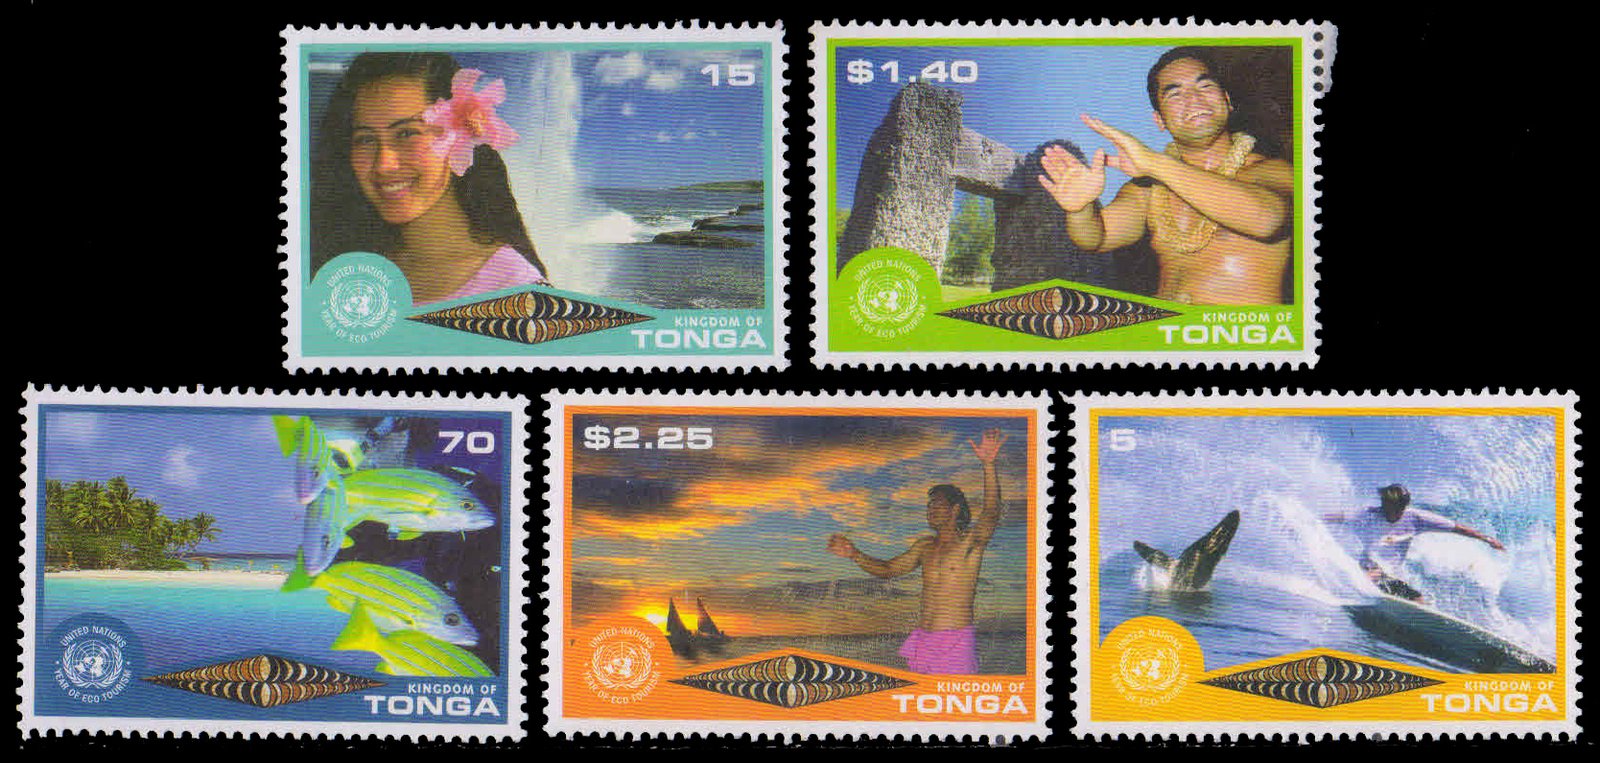 TONGA 2002-UN Year of Eco Tourism-Whale, Coastline, Fish & Beach, Dancer, Sunset, Set of 4 Stamps, MNH, S.G. 1513-1517-Cat � 7-